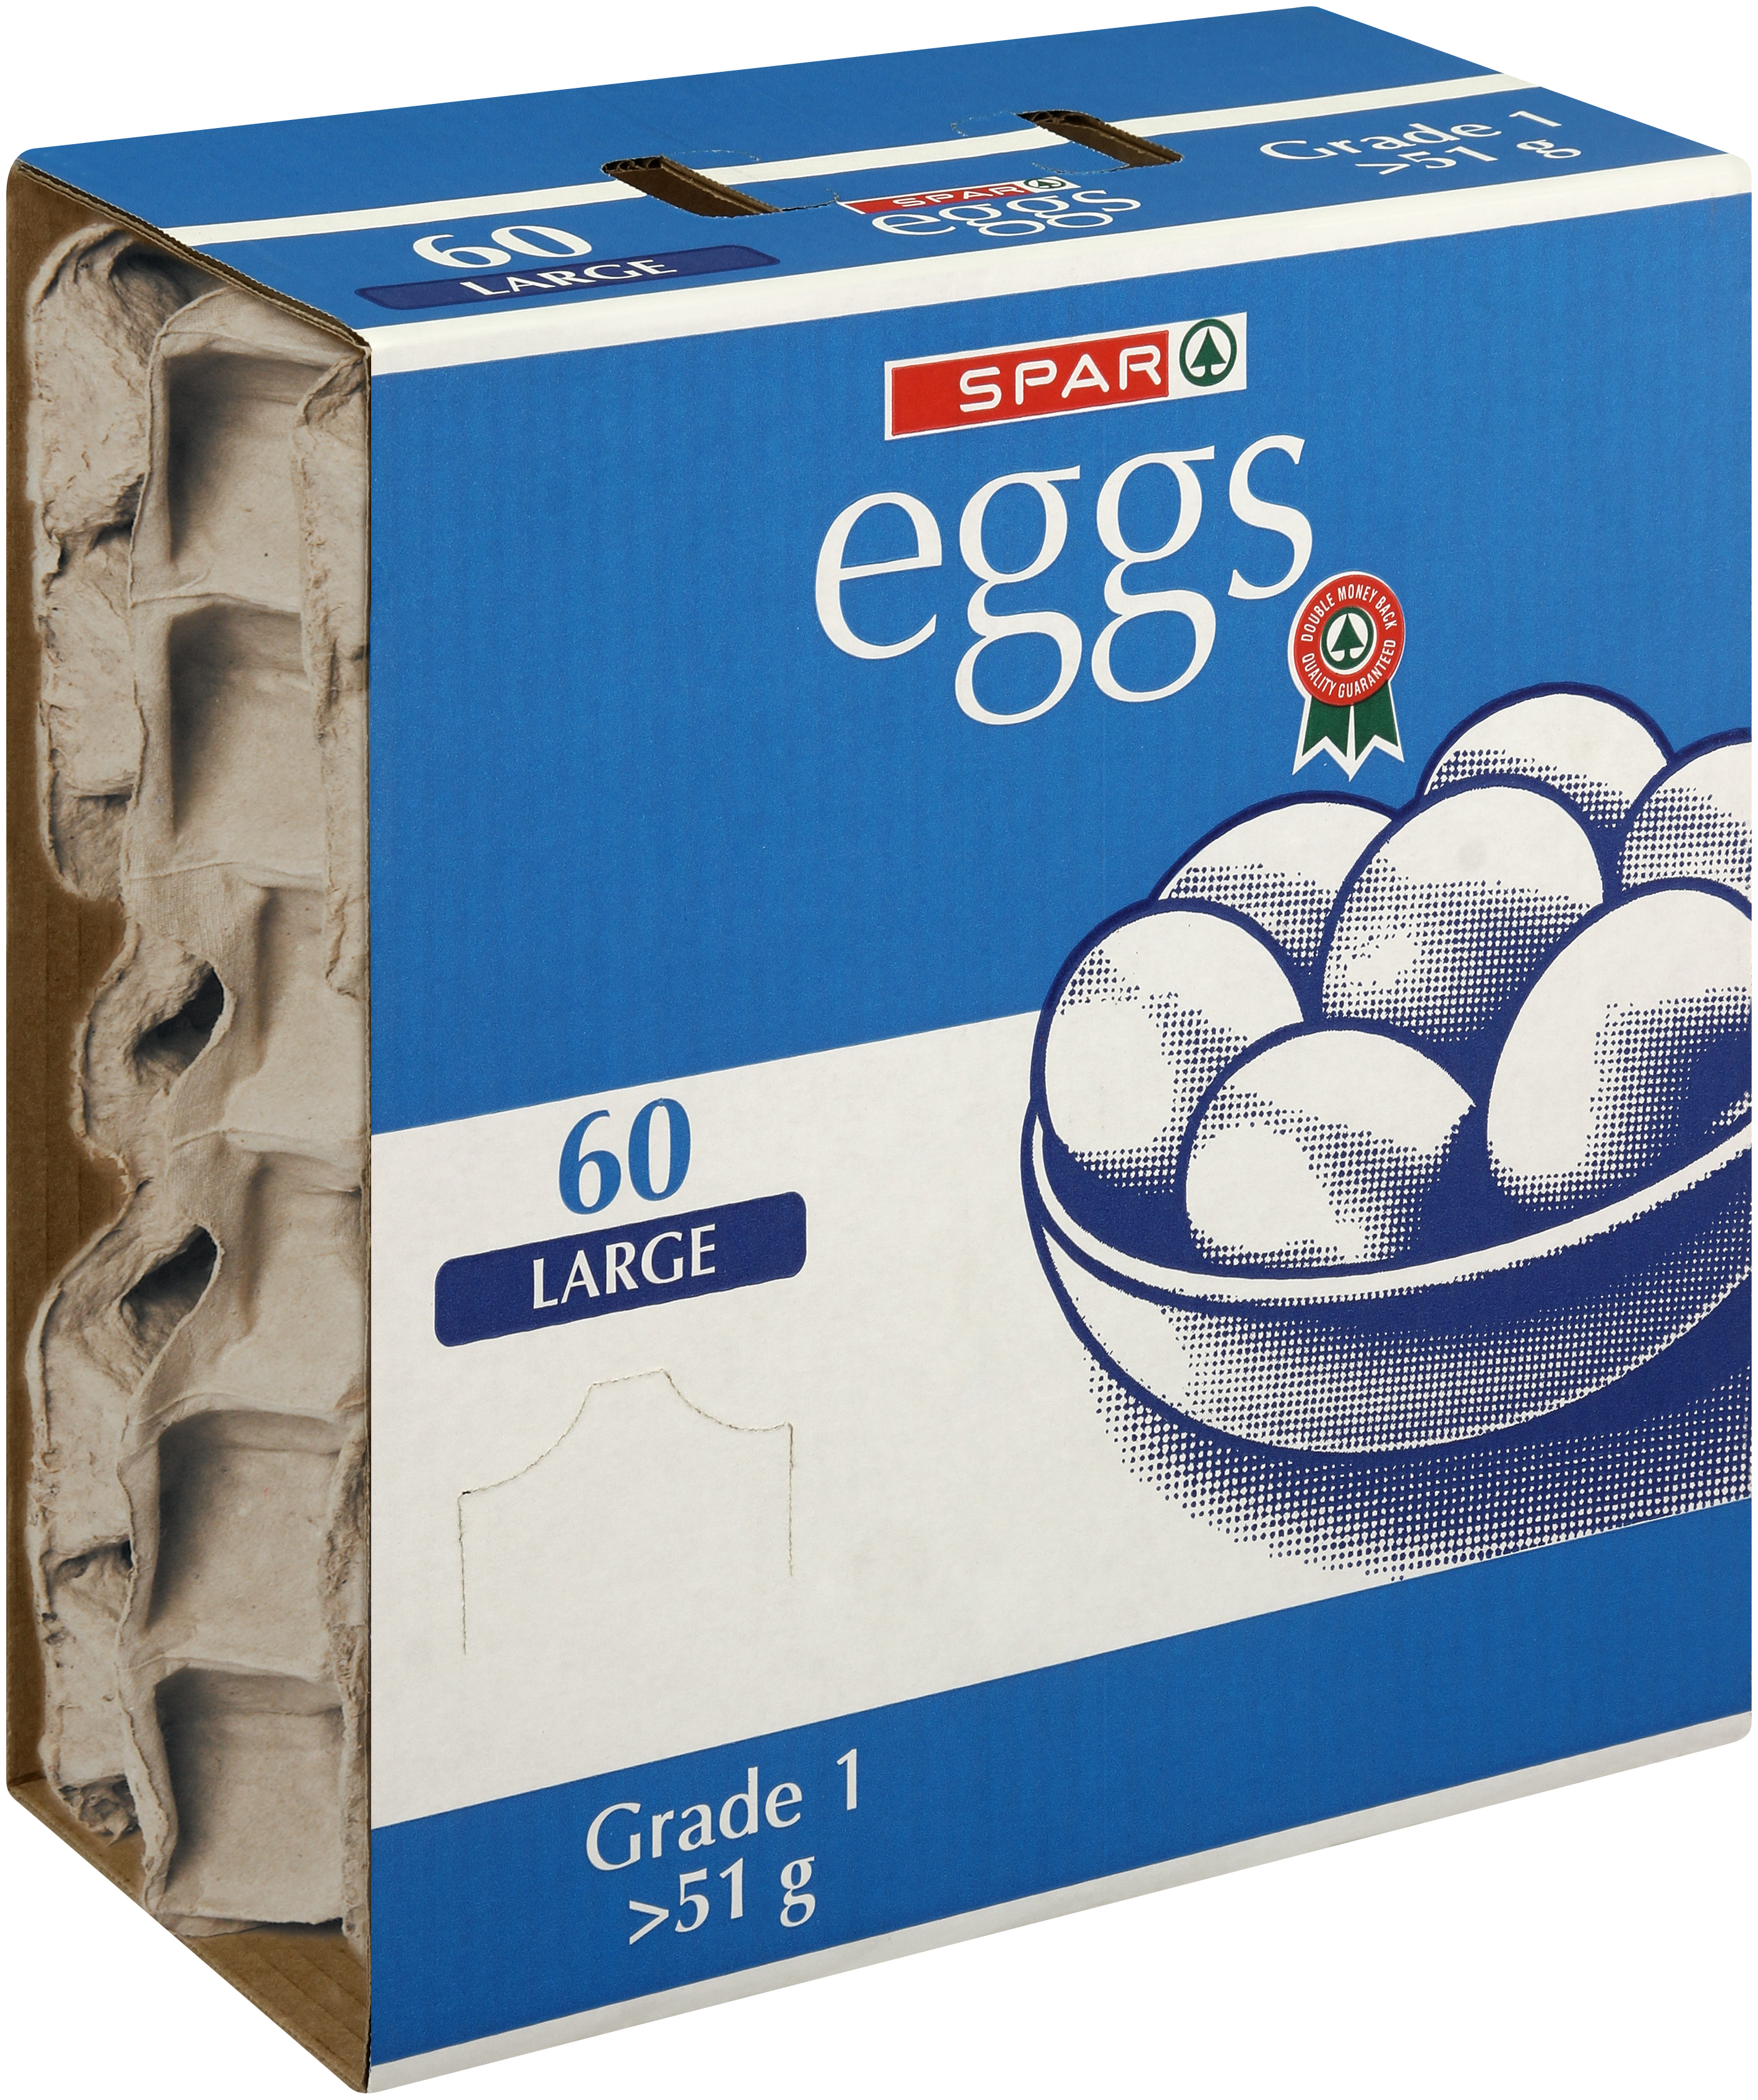 eggs large 60s